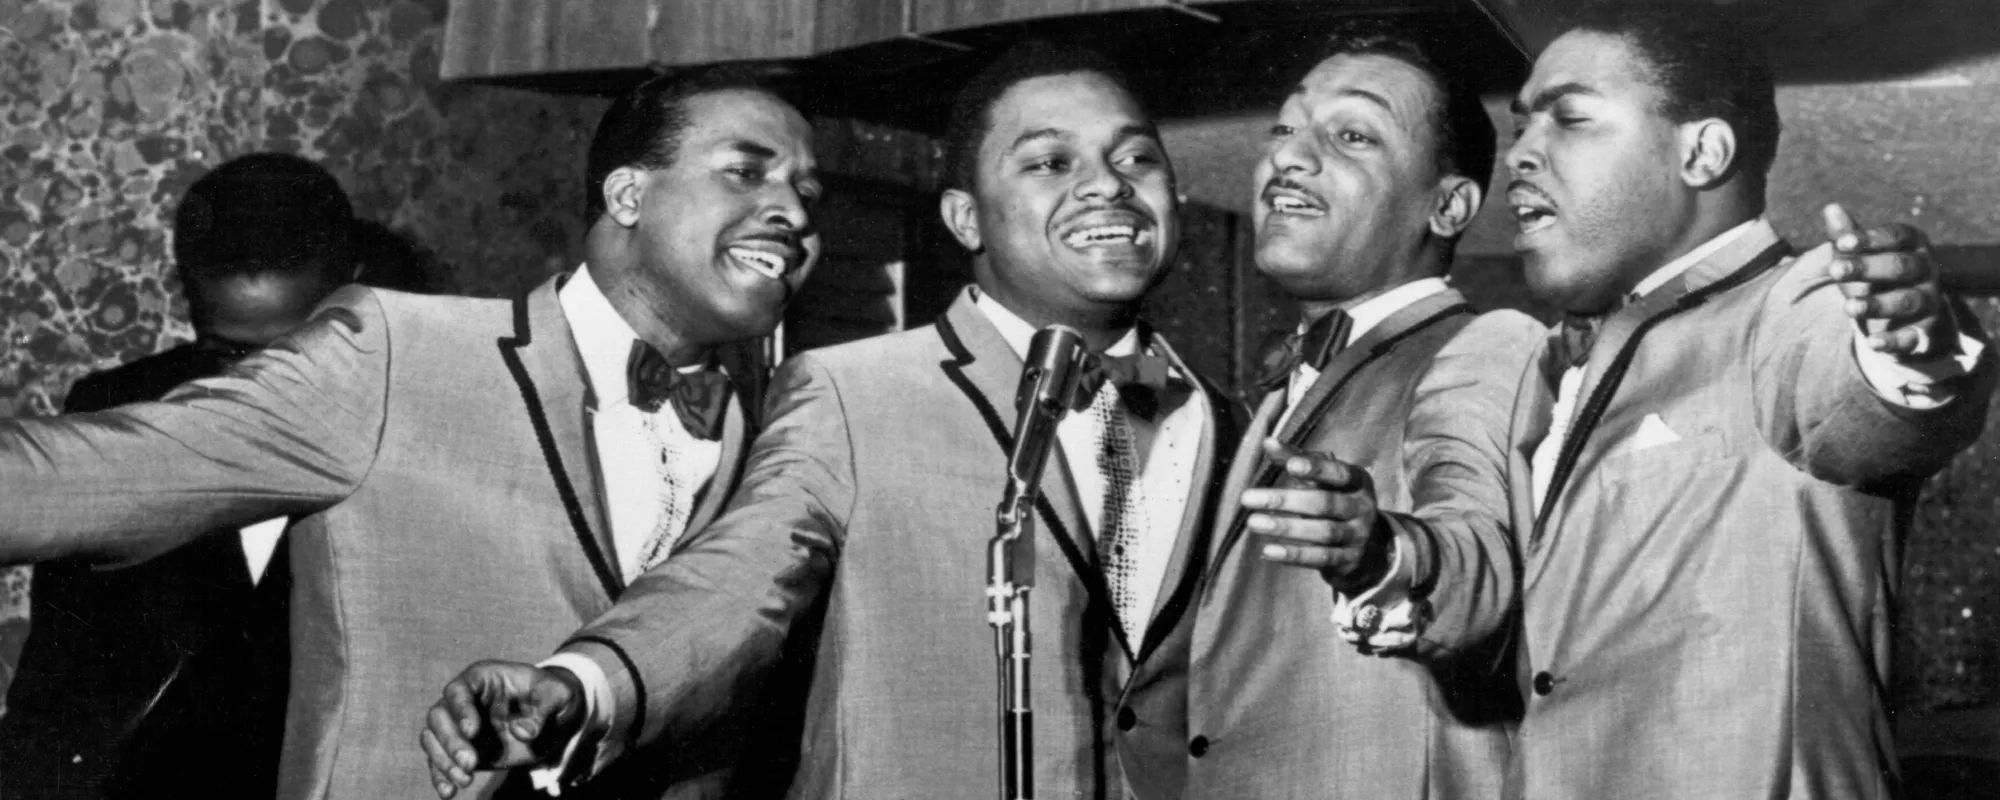 The Meaning Behind “Reach Out I’ll Be There” by the Four Tops and How Levi Stubbs Was Pushed to the Limit When Recording It